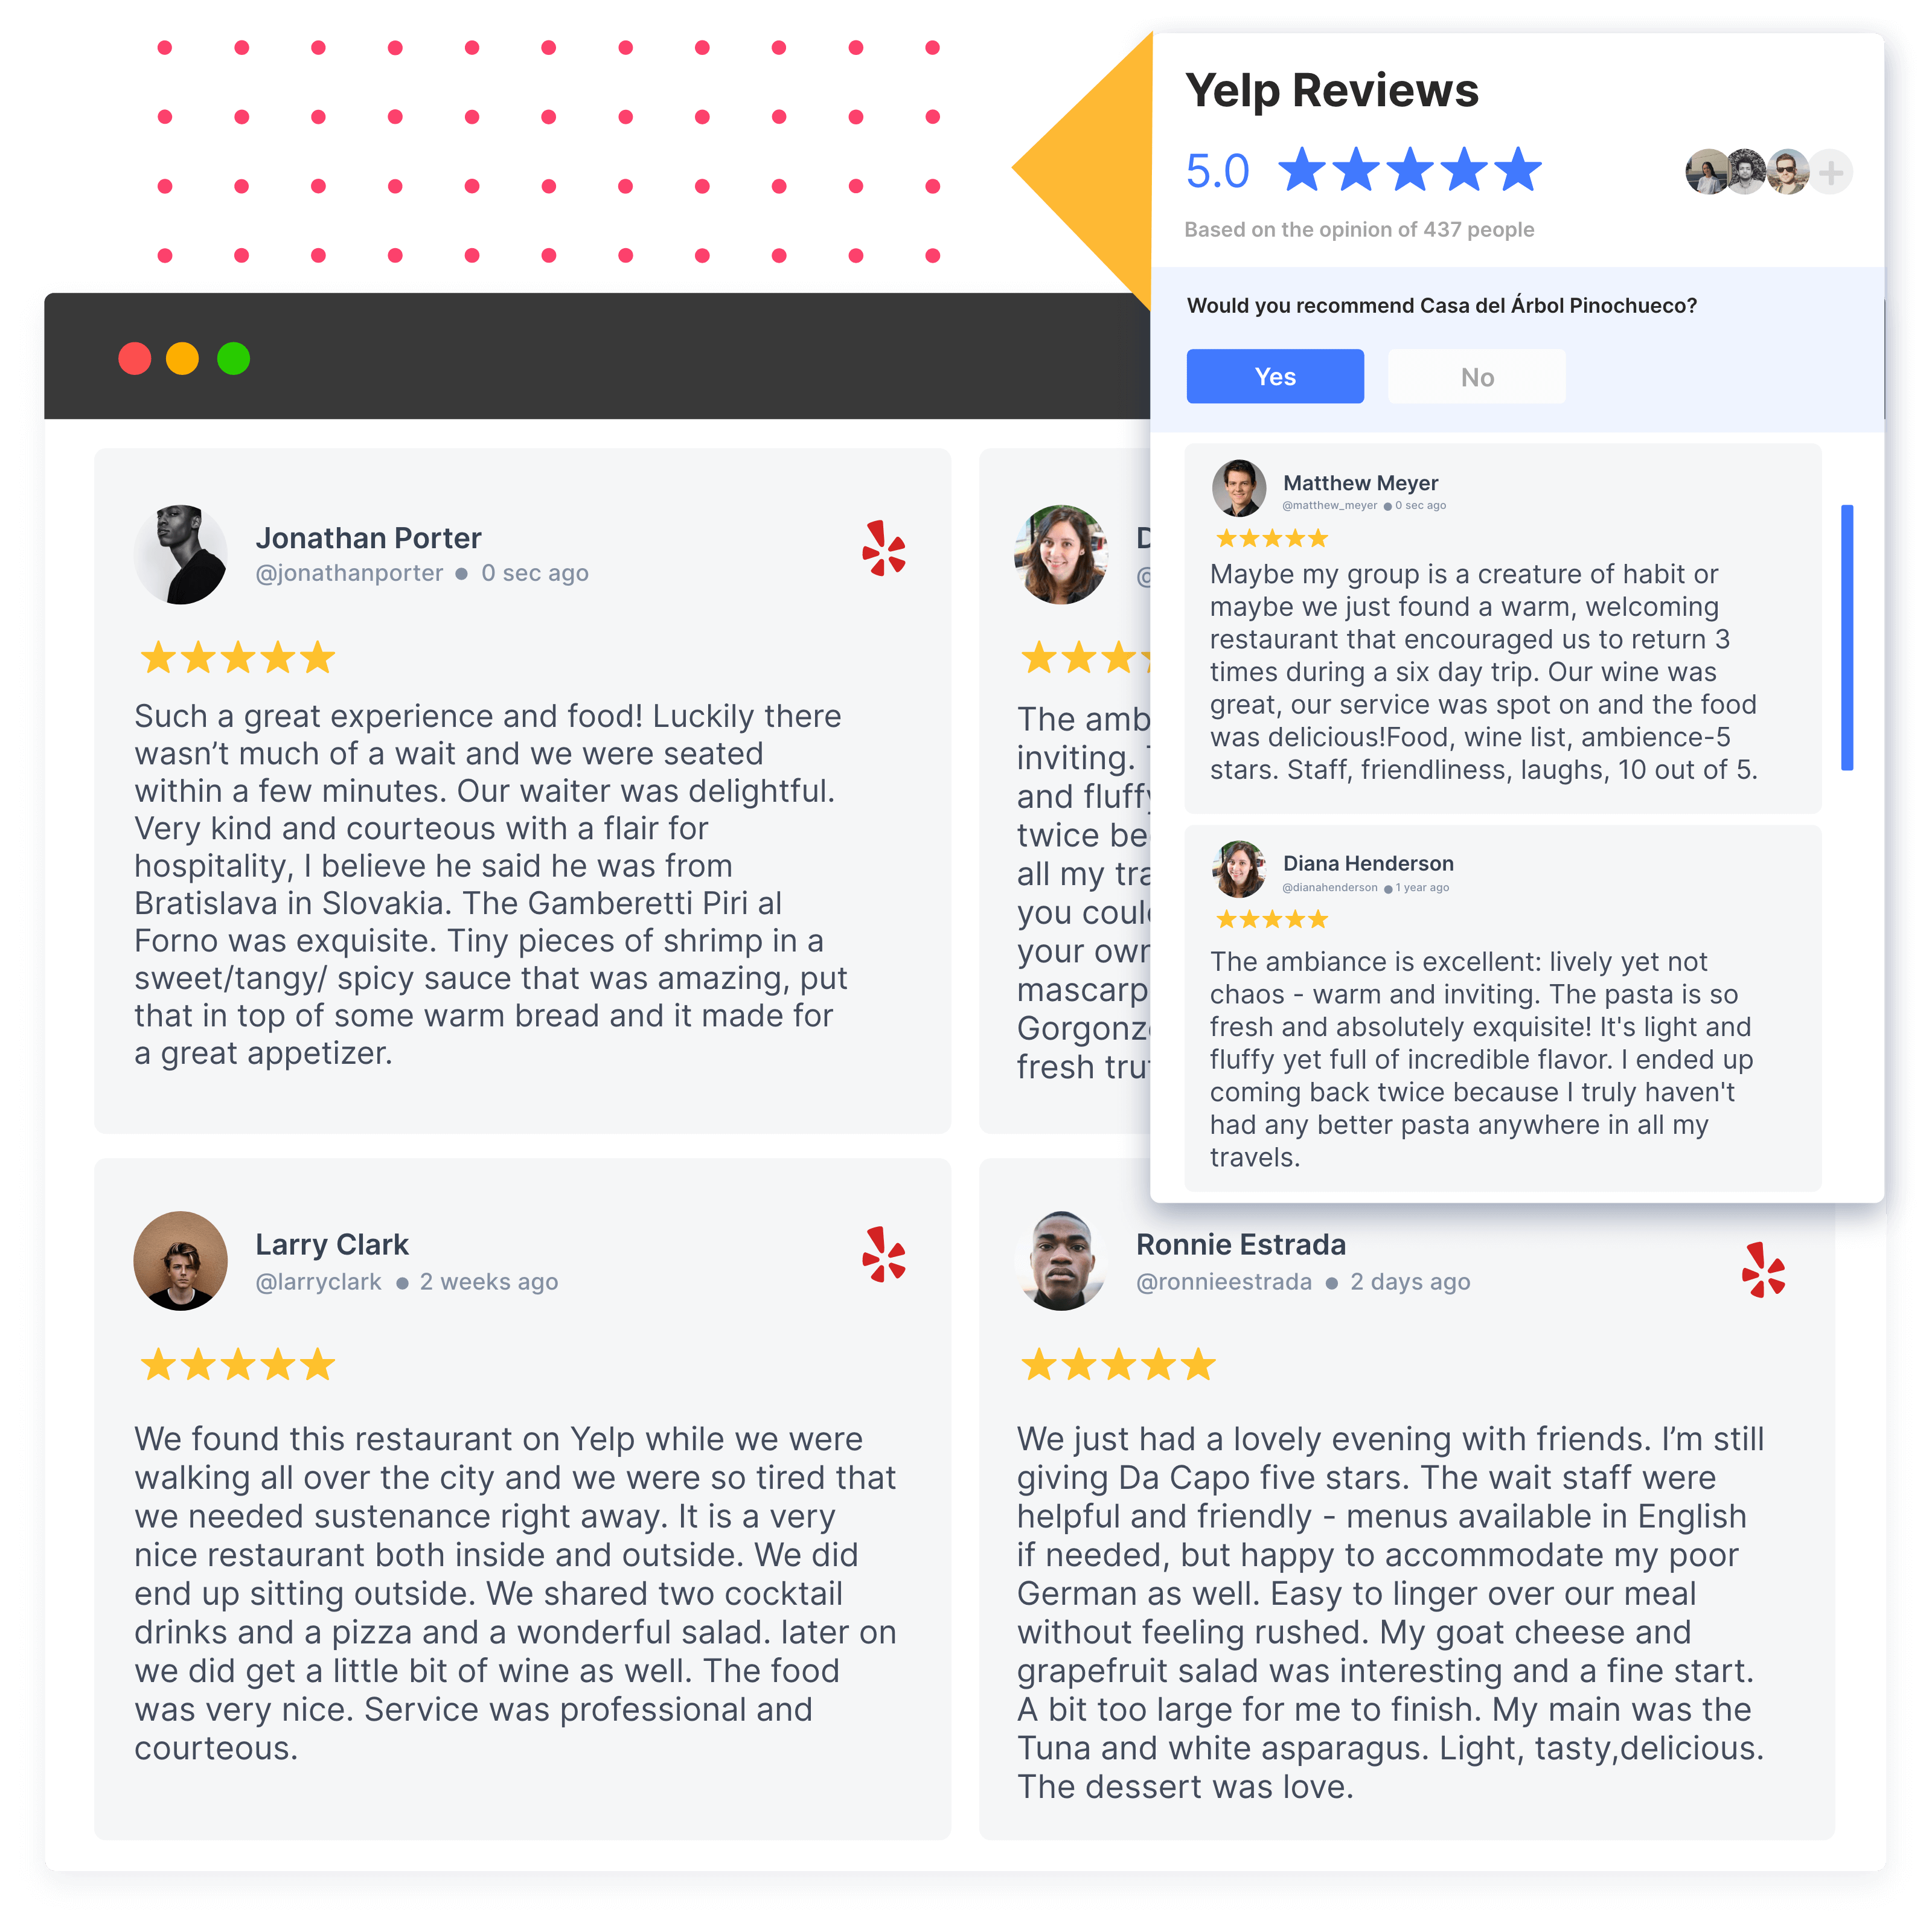 Yelp Review Widget To Add Yelp Reviews on Website Tagembed